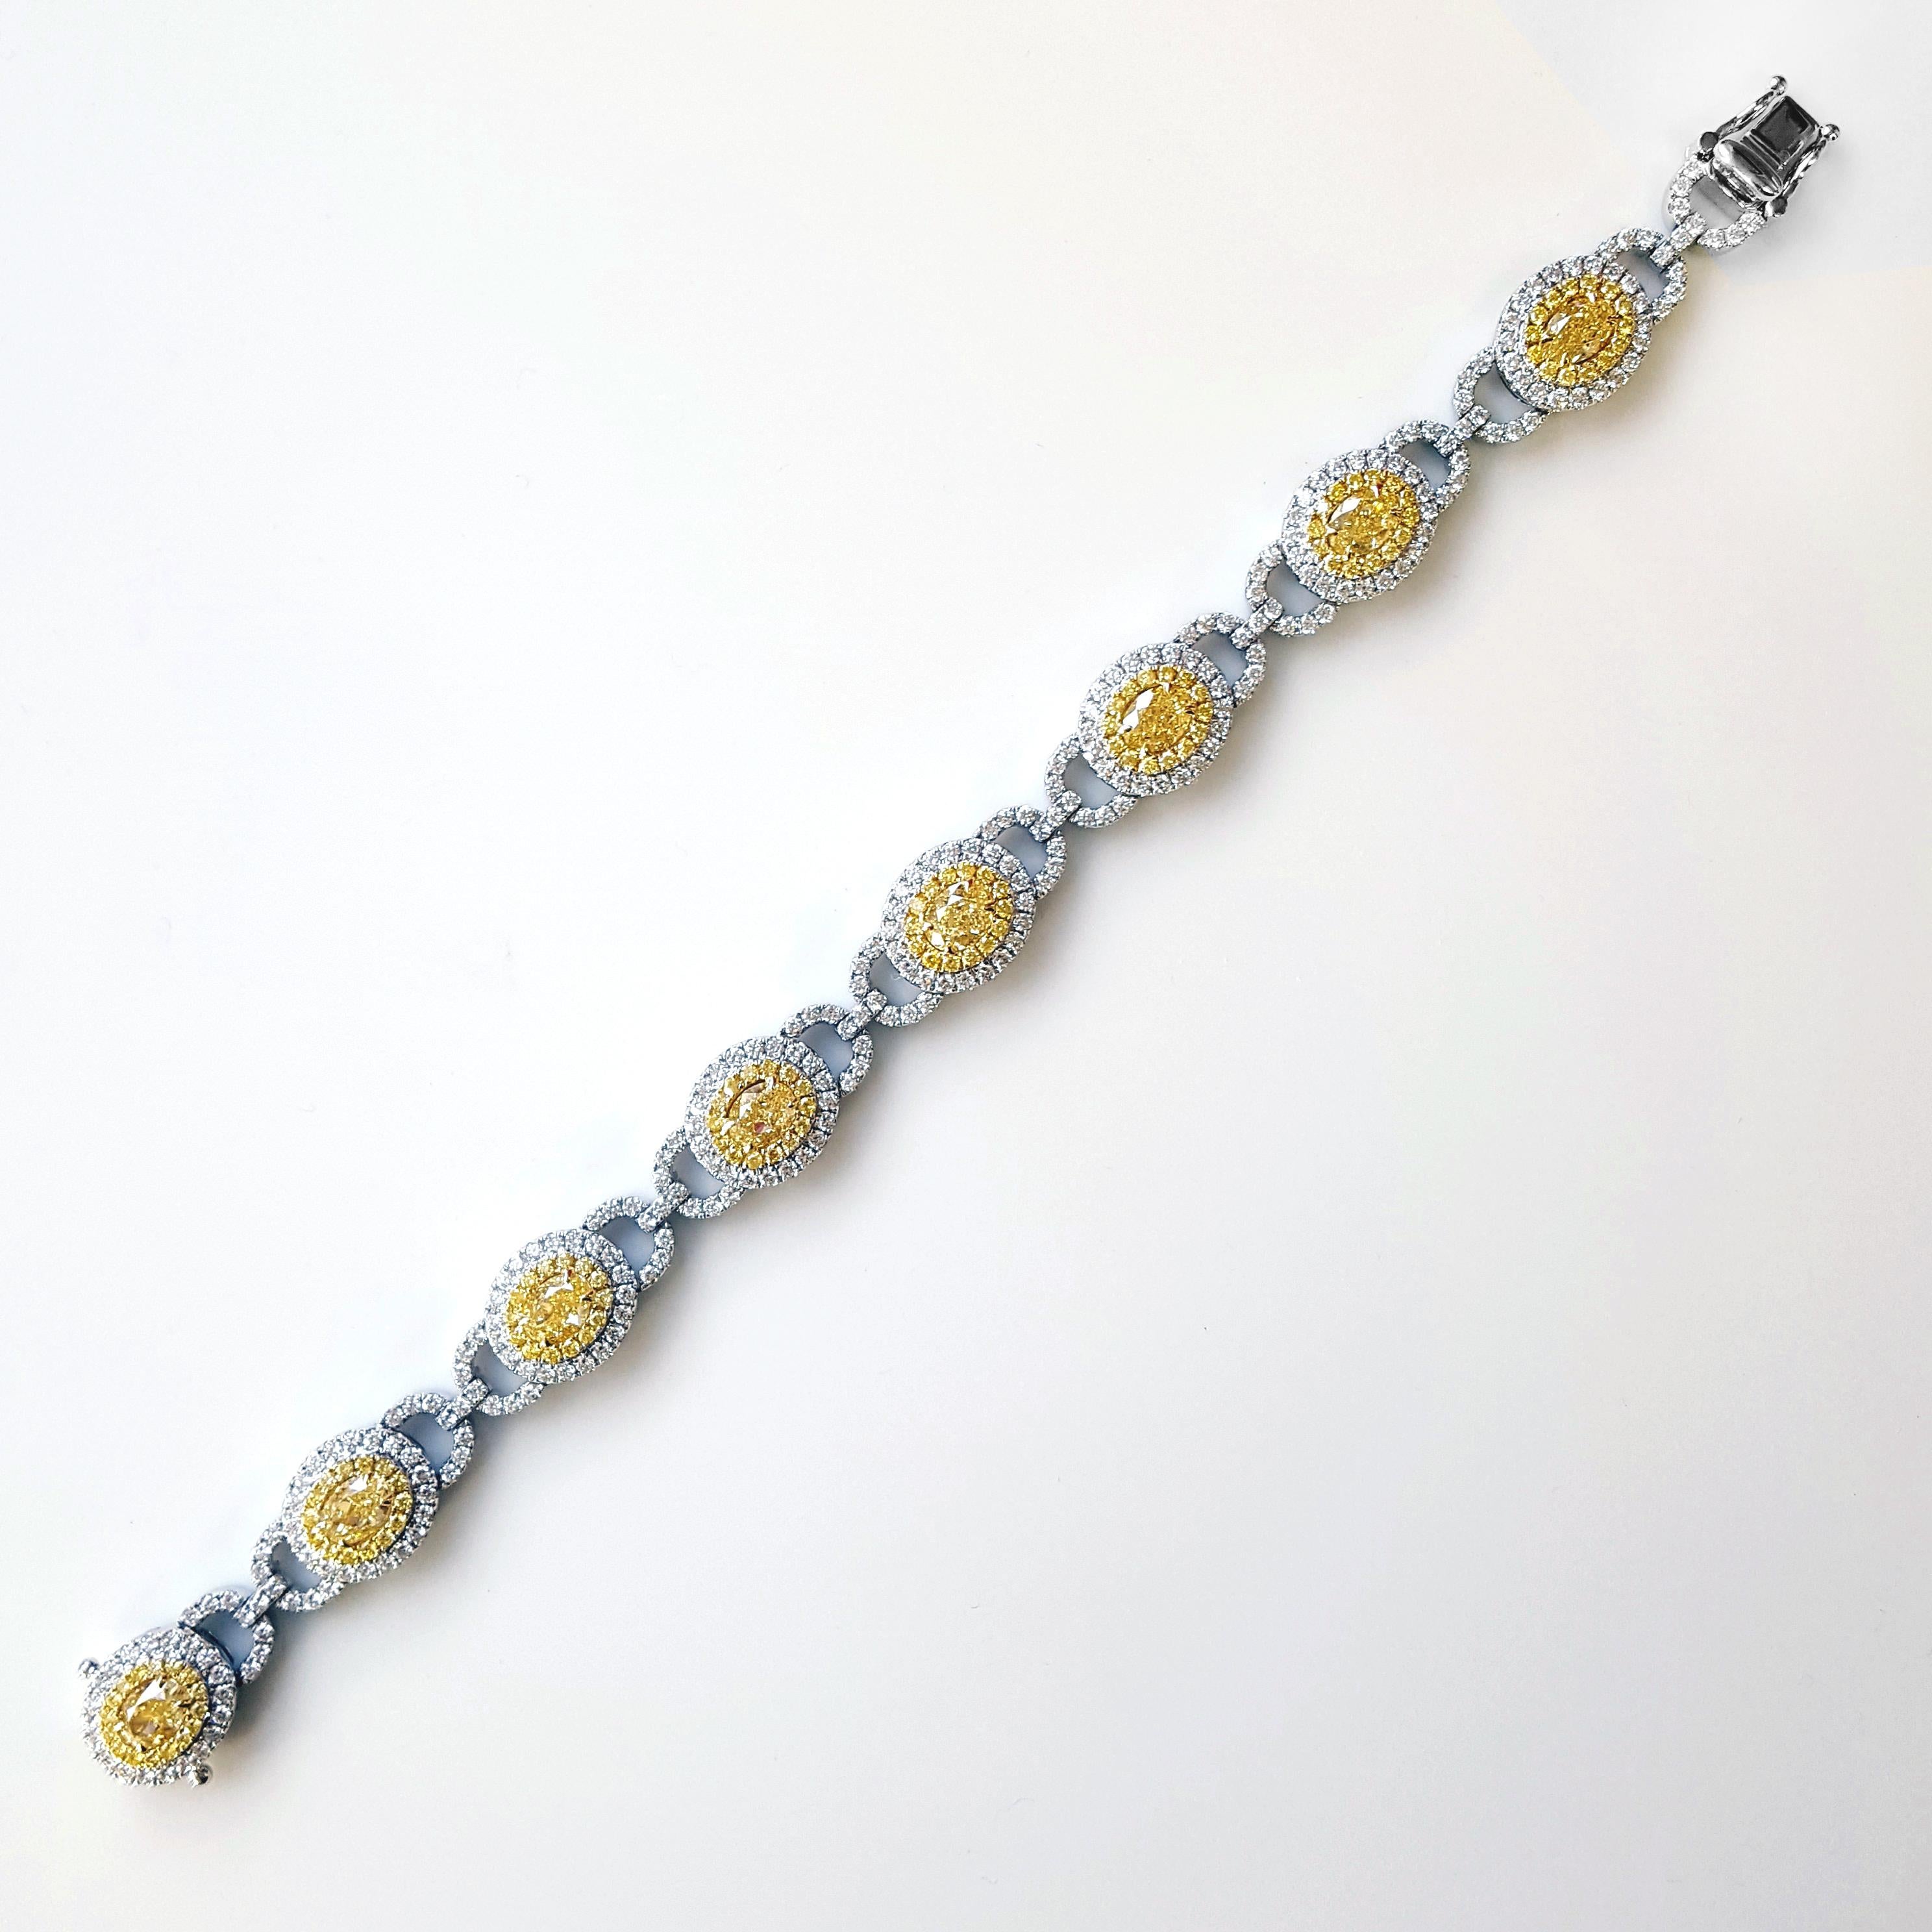 Contemporary 10.60 Carat Oval-Cut Yellow and White Diamond Bracelet, Set in 18K White Gold. For Sale